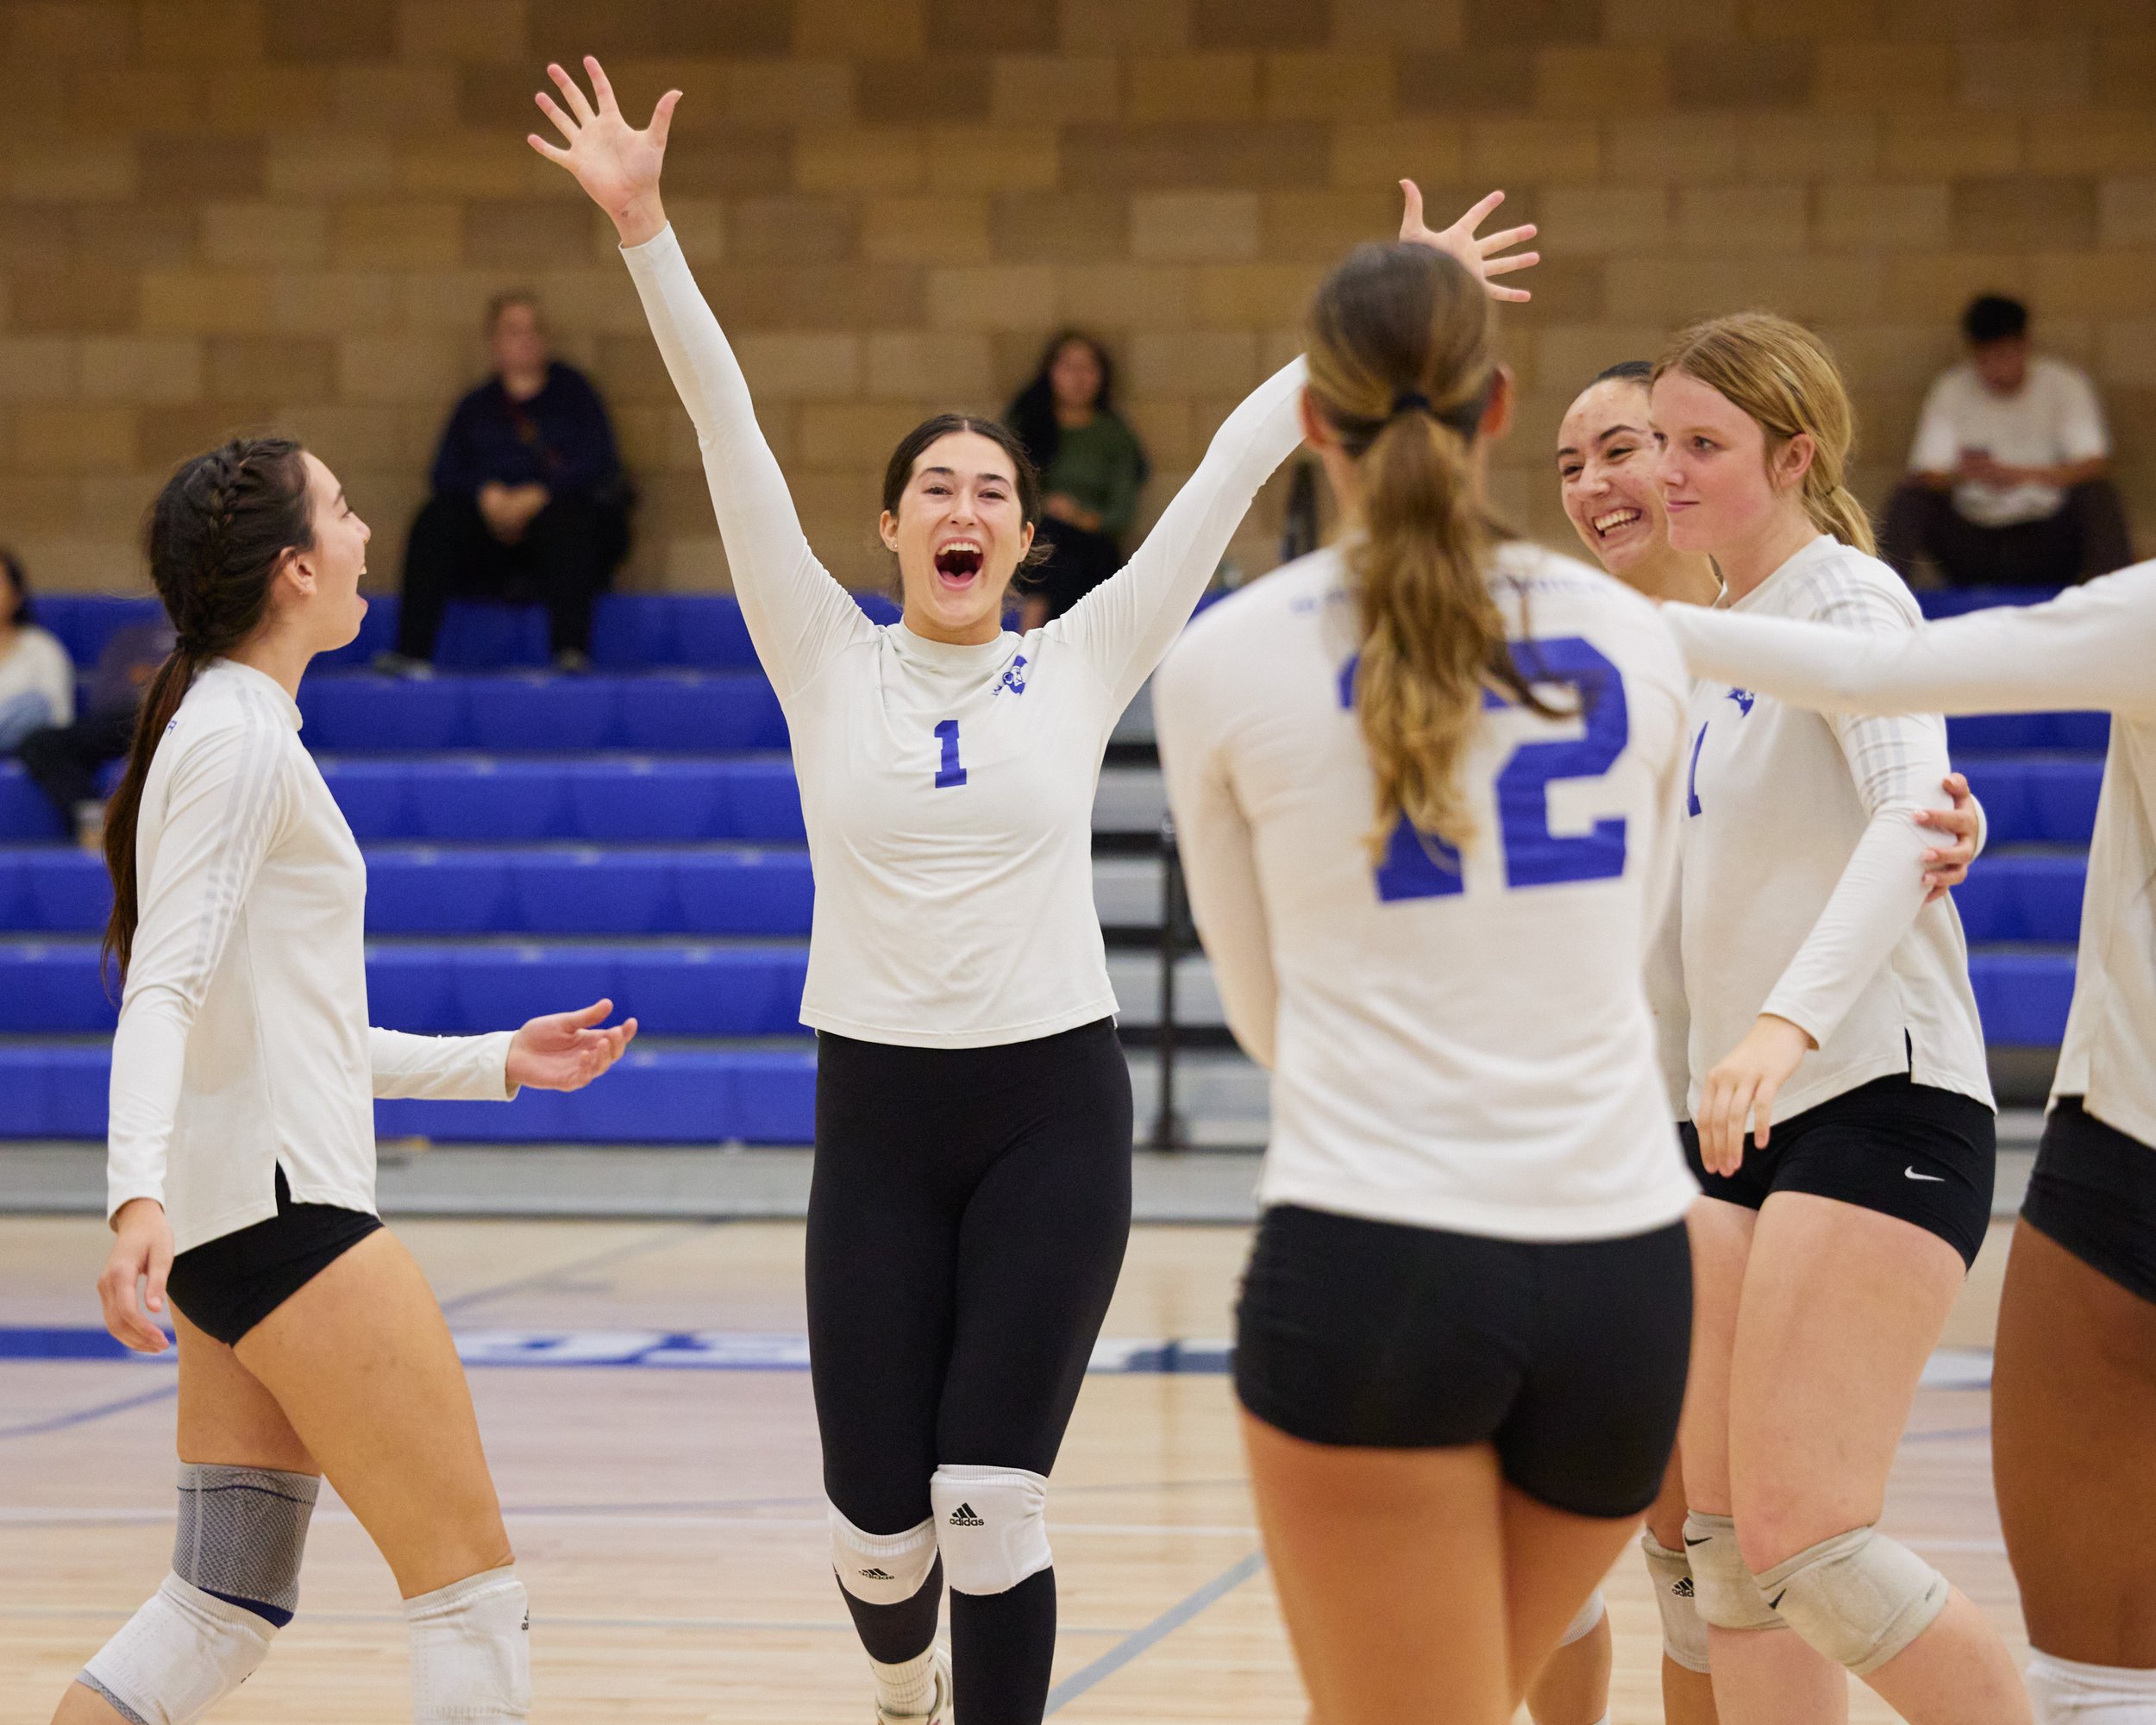  Santa Monica College Corsairs' Maiella Riva (center) and teammates celebrate their 3-1 win at the end of the women's volleyball match against the Los Angeles Mission College Eagles on Wednesday, Sept. 13, 2023, at the Health Fitness & Athletics Comp